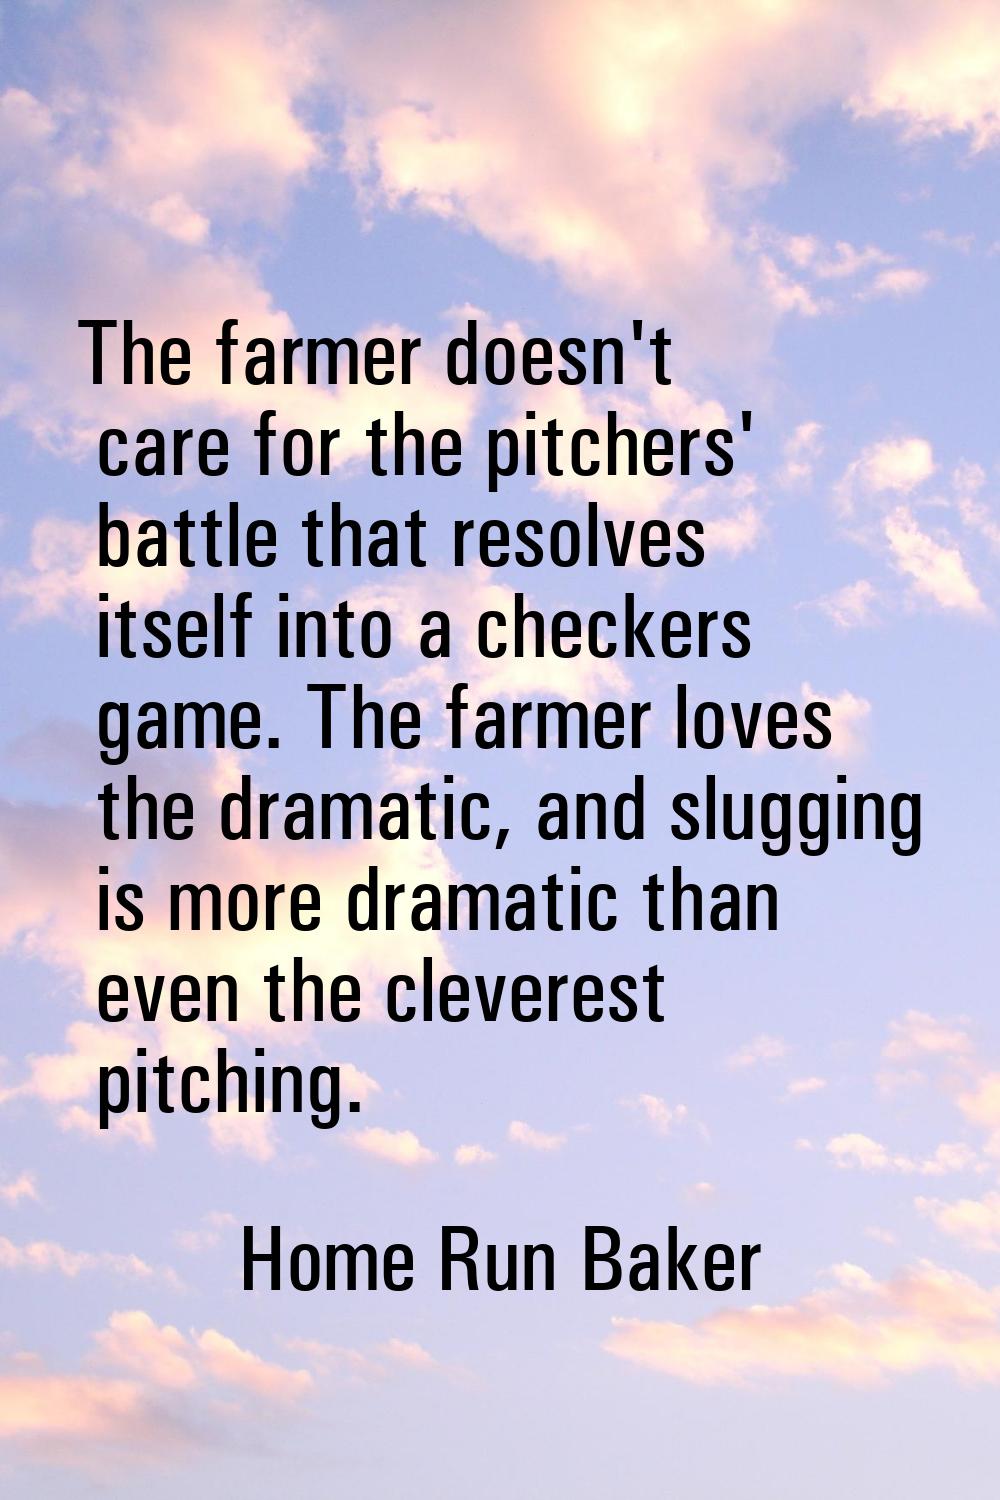 The farmer doesn't care for the pitchers' battle that resolves itself into a checkers game. The far